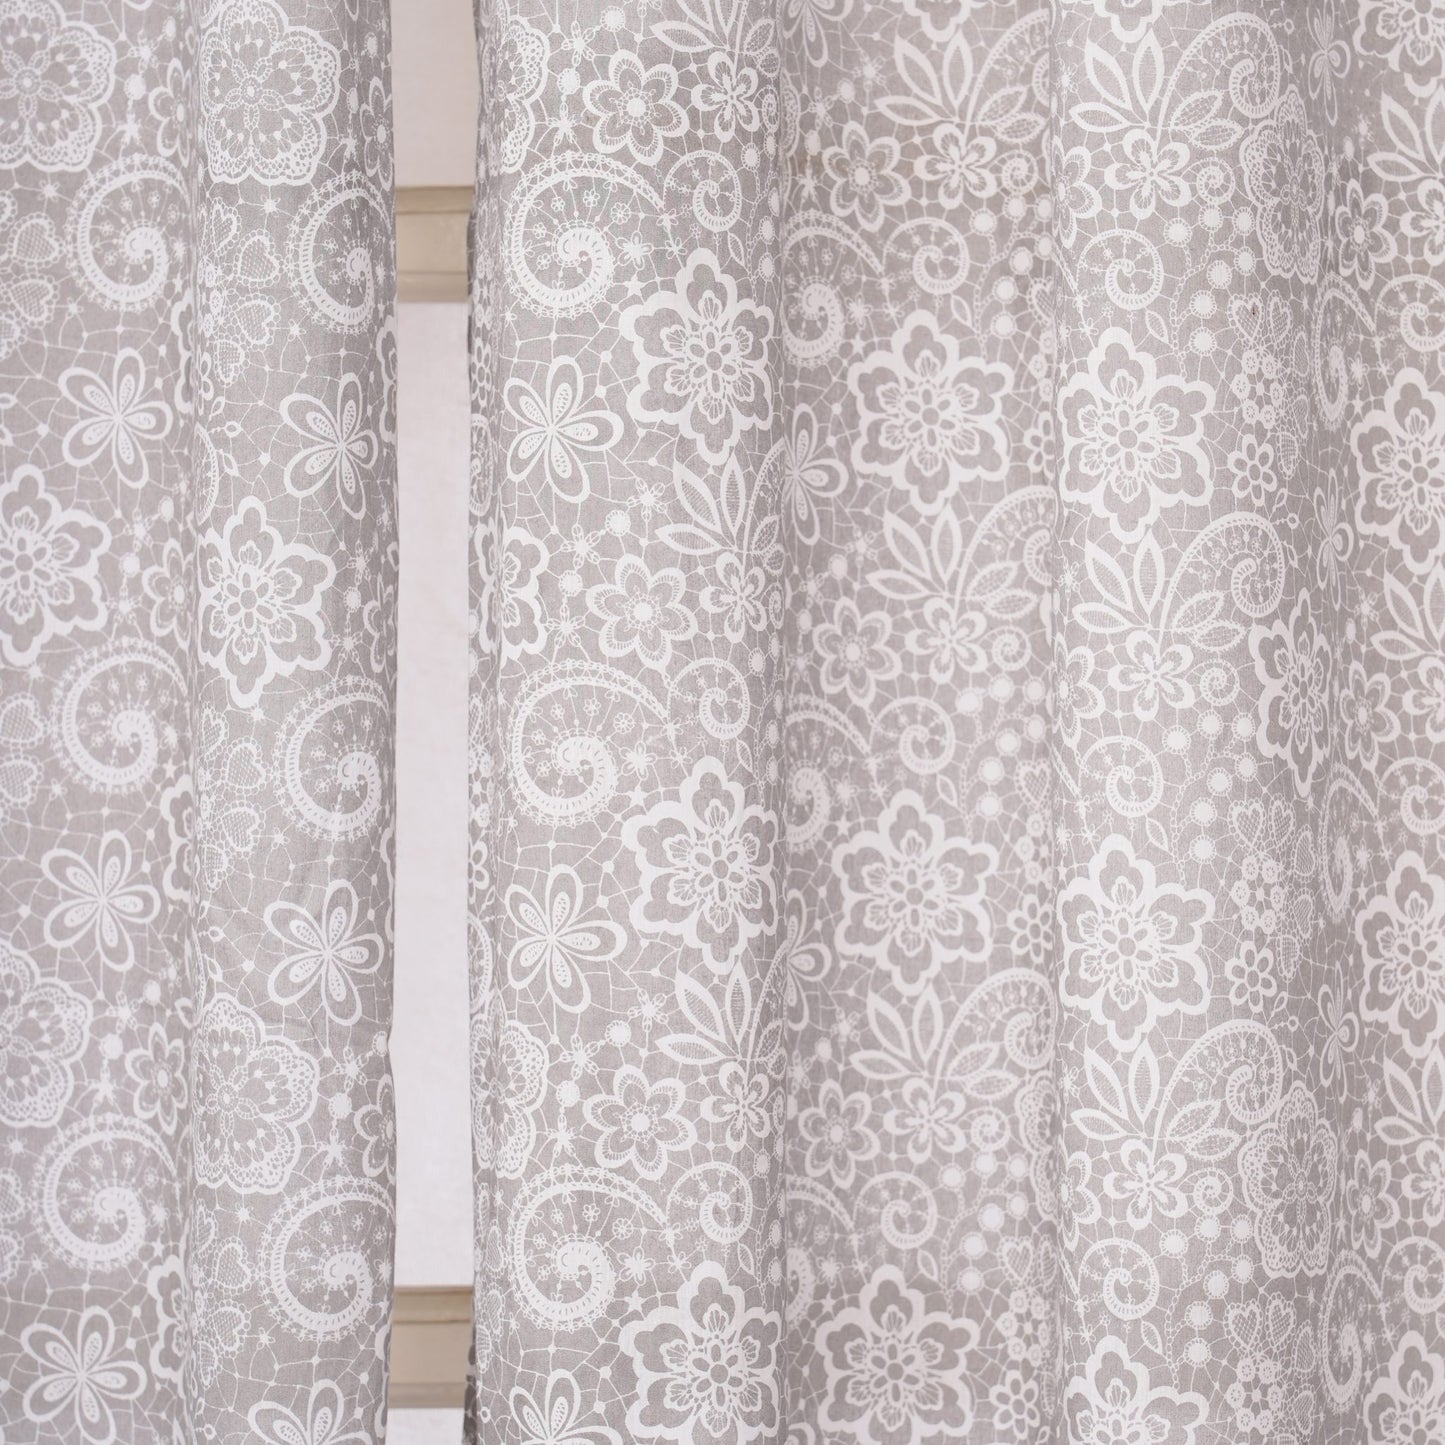 LACE print - Grey cotton voile sheer curtain panel